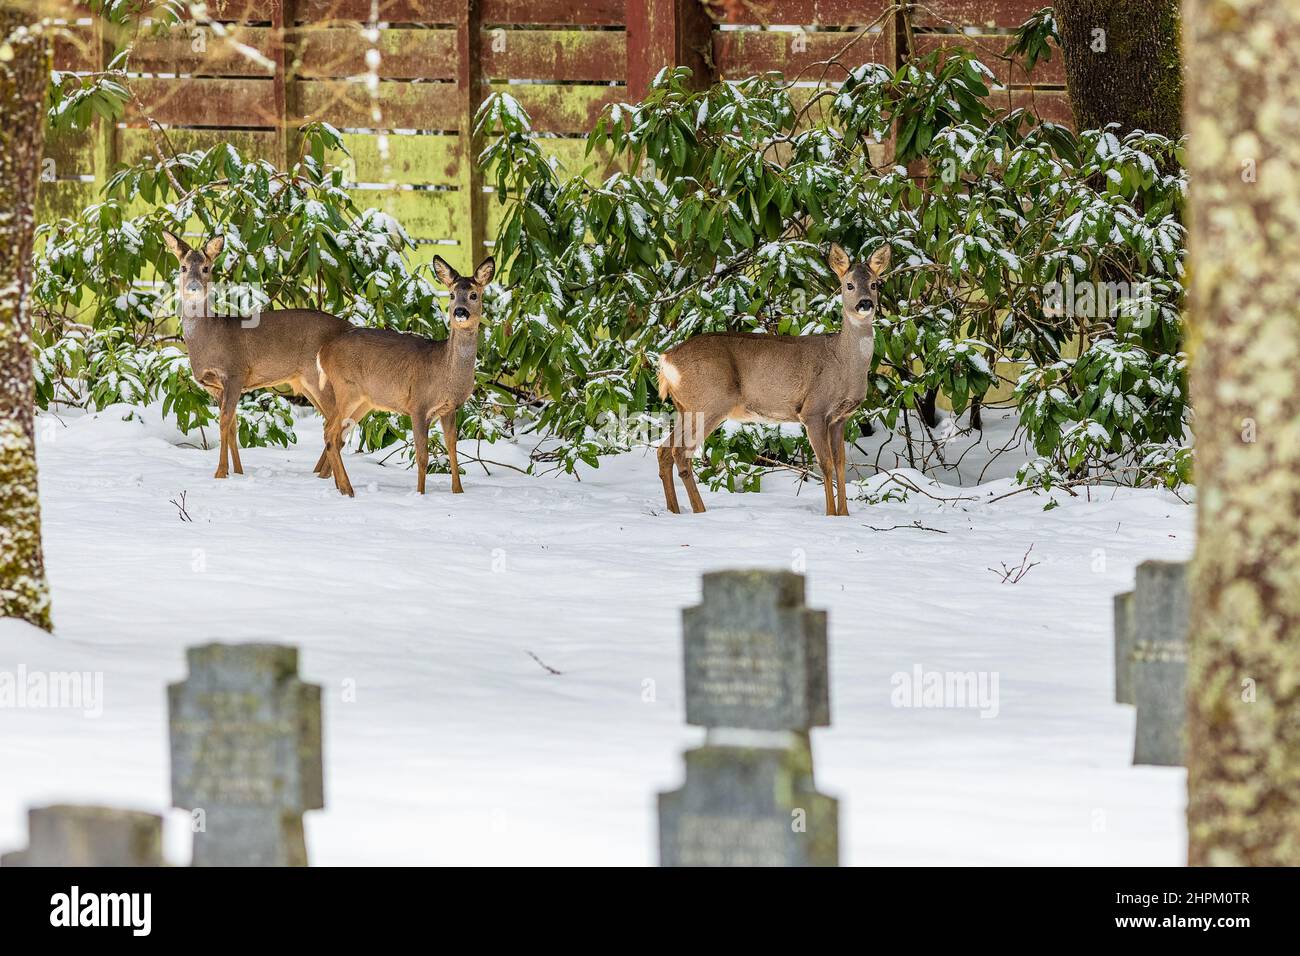 Three brown roe deer standing on white snow in a cemetery with stone crosses. Green bush and wooden fence in the background. Winter day at a cemetery. Stock Photo